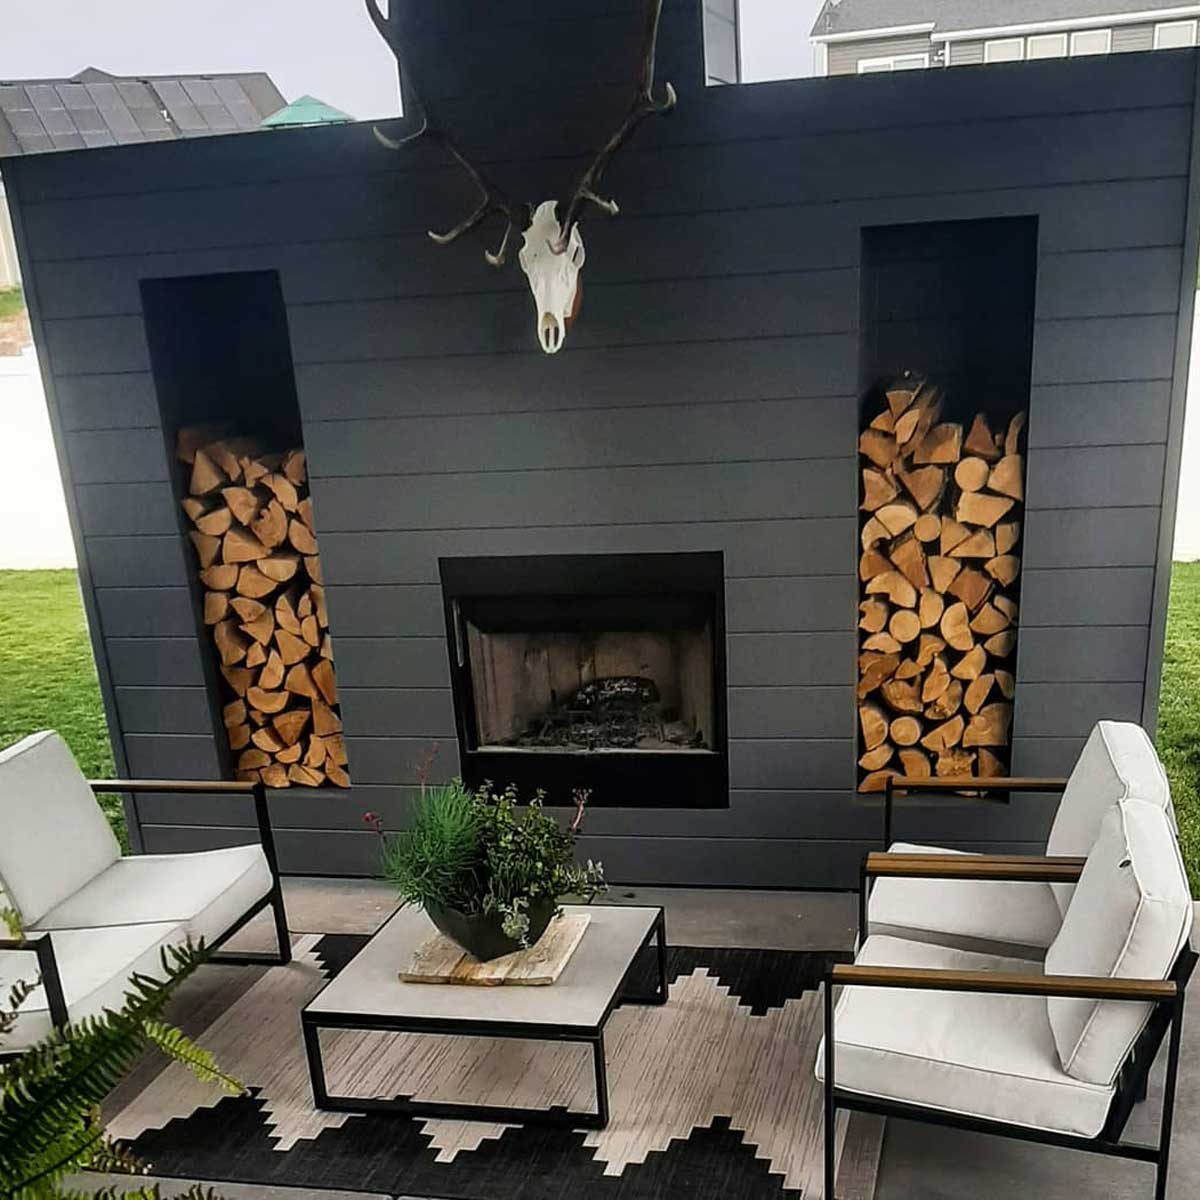 Outdoor Fireplace 123097435 4521036234604634 6362344401333196068 N